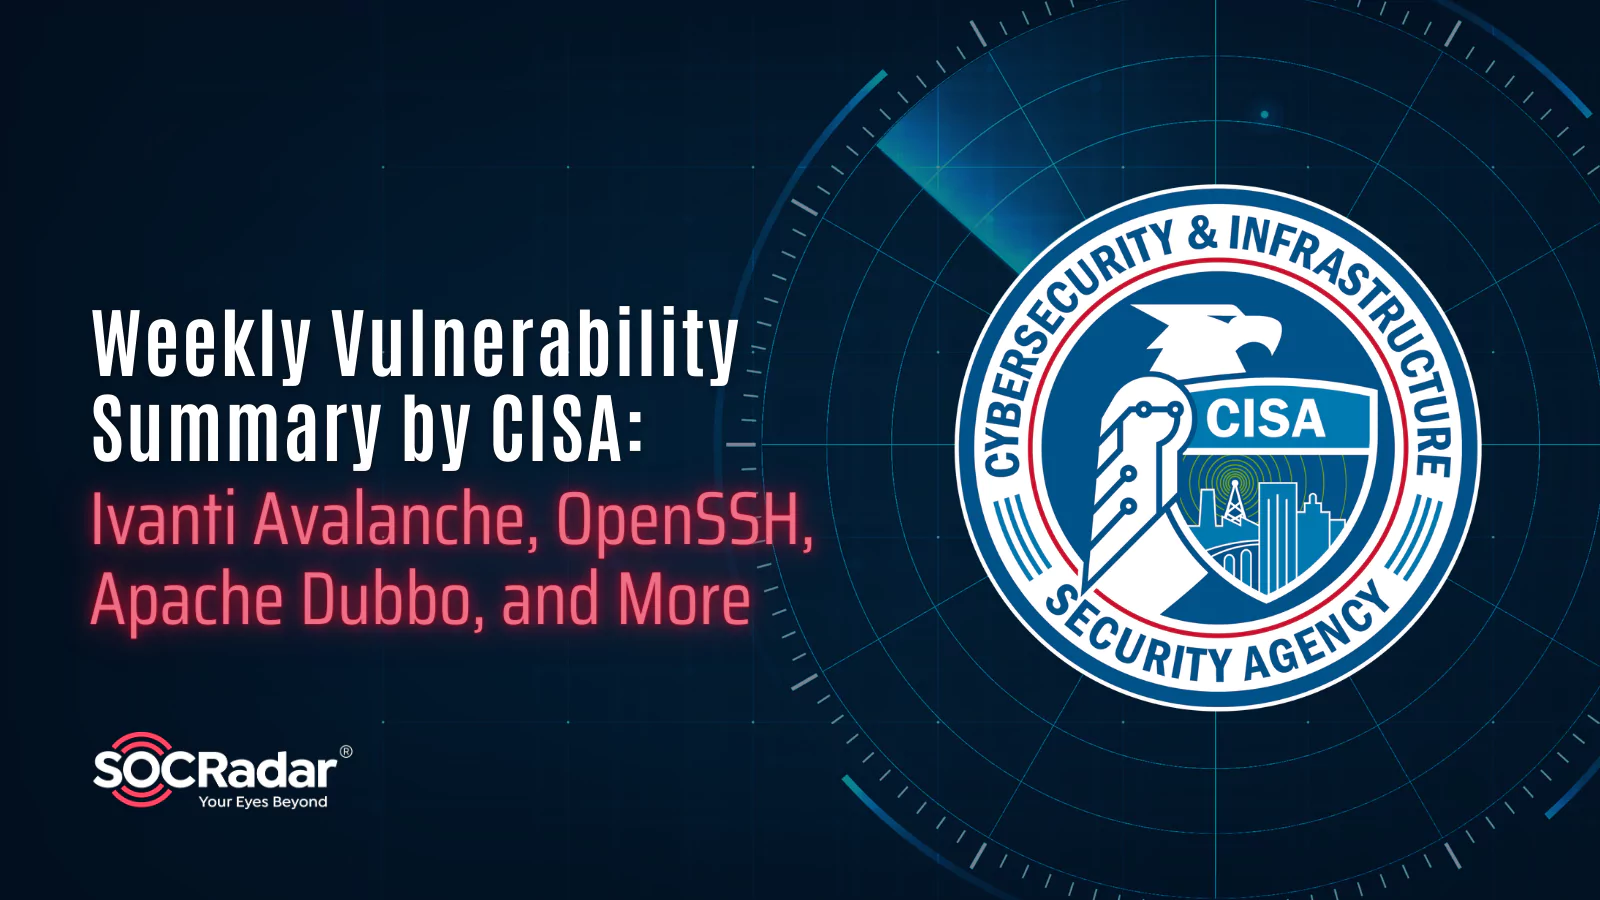 SOCRadar® Cyber Intelligence Inc. | Weekly Vulnerability Summary by CISA: Ivanti Avalanche, Apache Dubbo, OpenSSH, and More